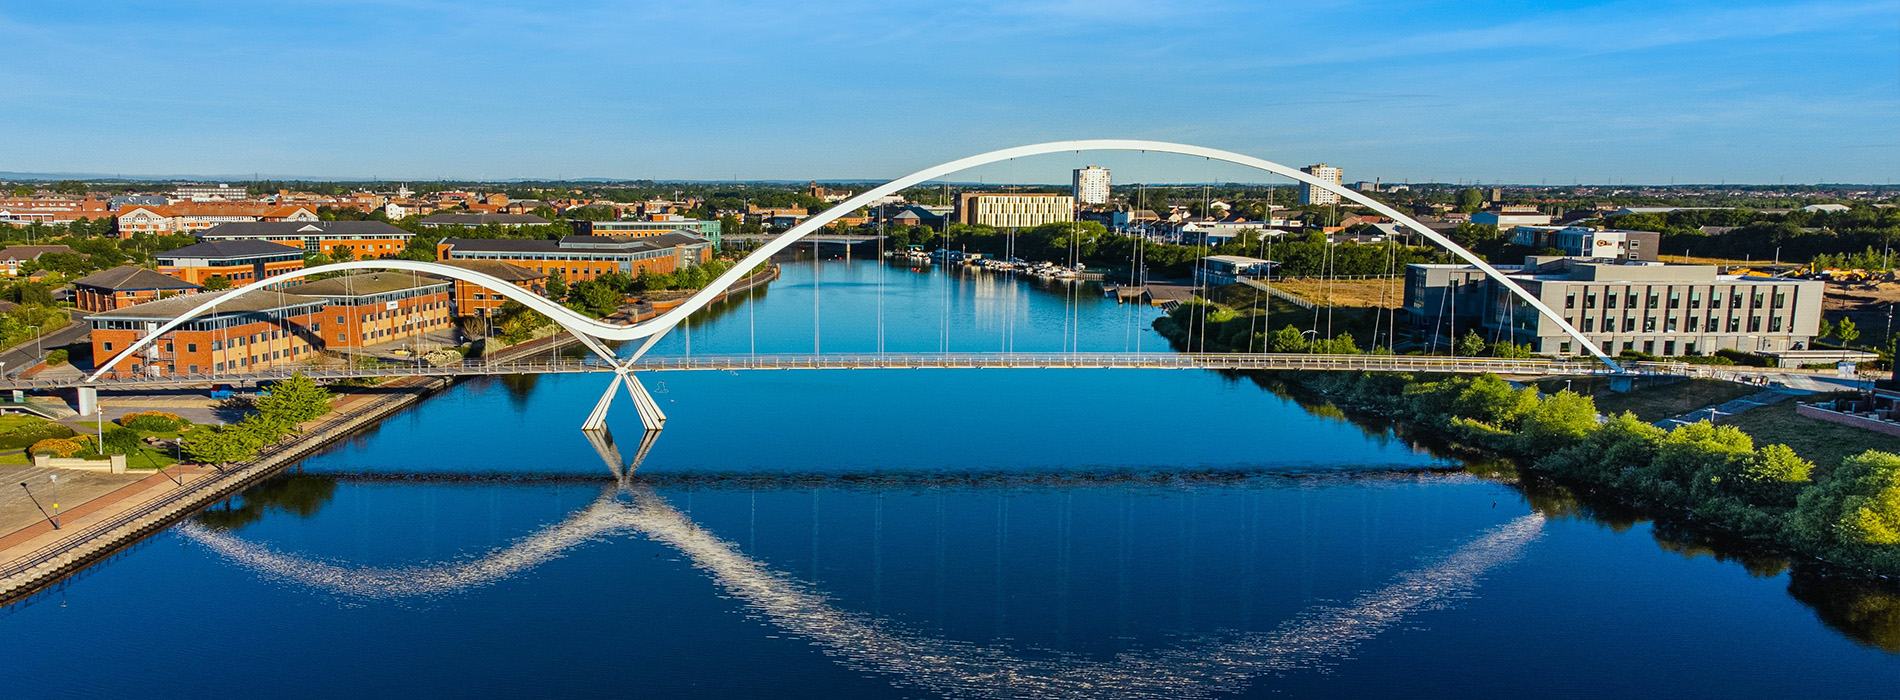 The image is a photograph of a modern, architectural pedestrian bridge spanning over a calm body of water, with the city skyline in the background and a clear blue sky above.